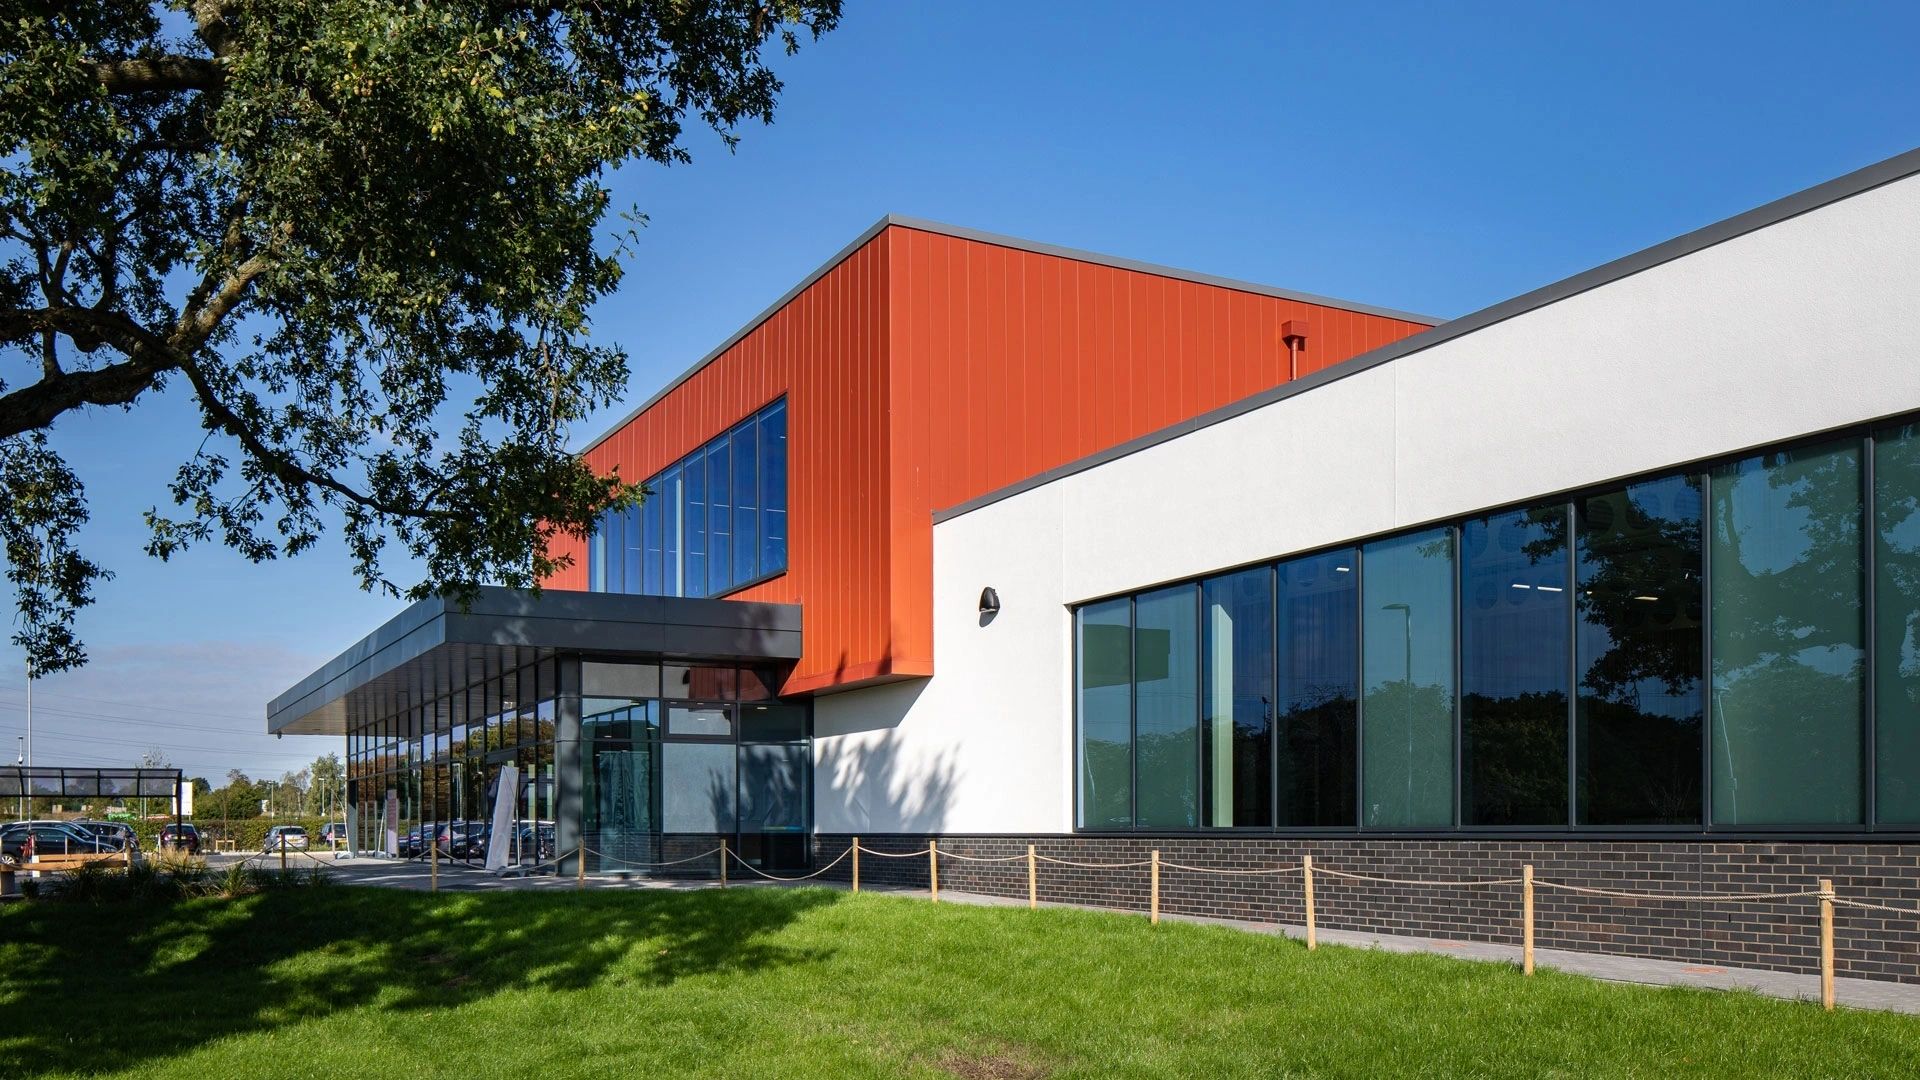 Bulmershe Leisure Centre - Woodley - Places Leisure People